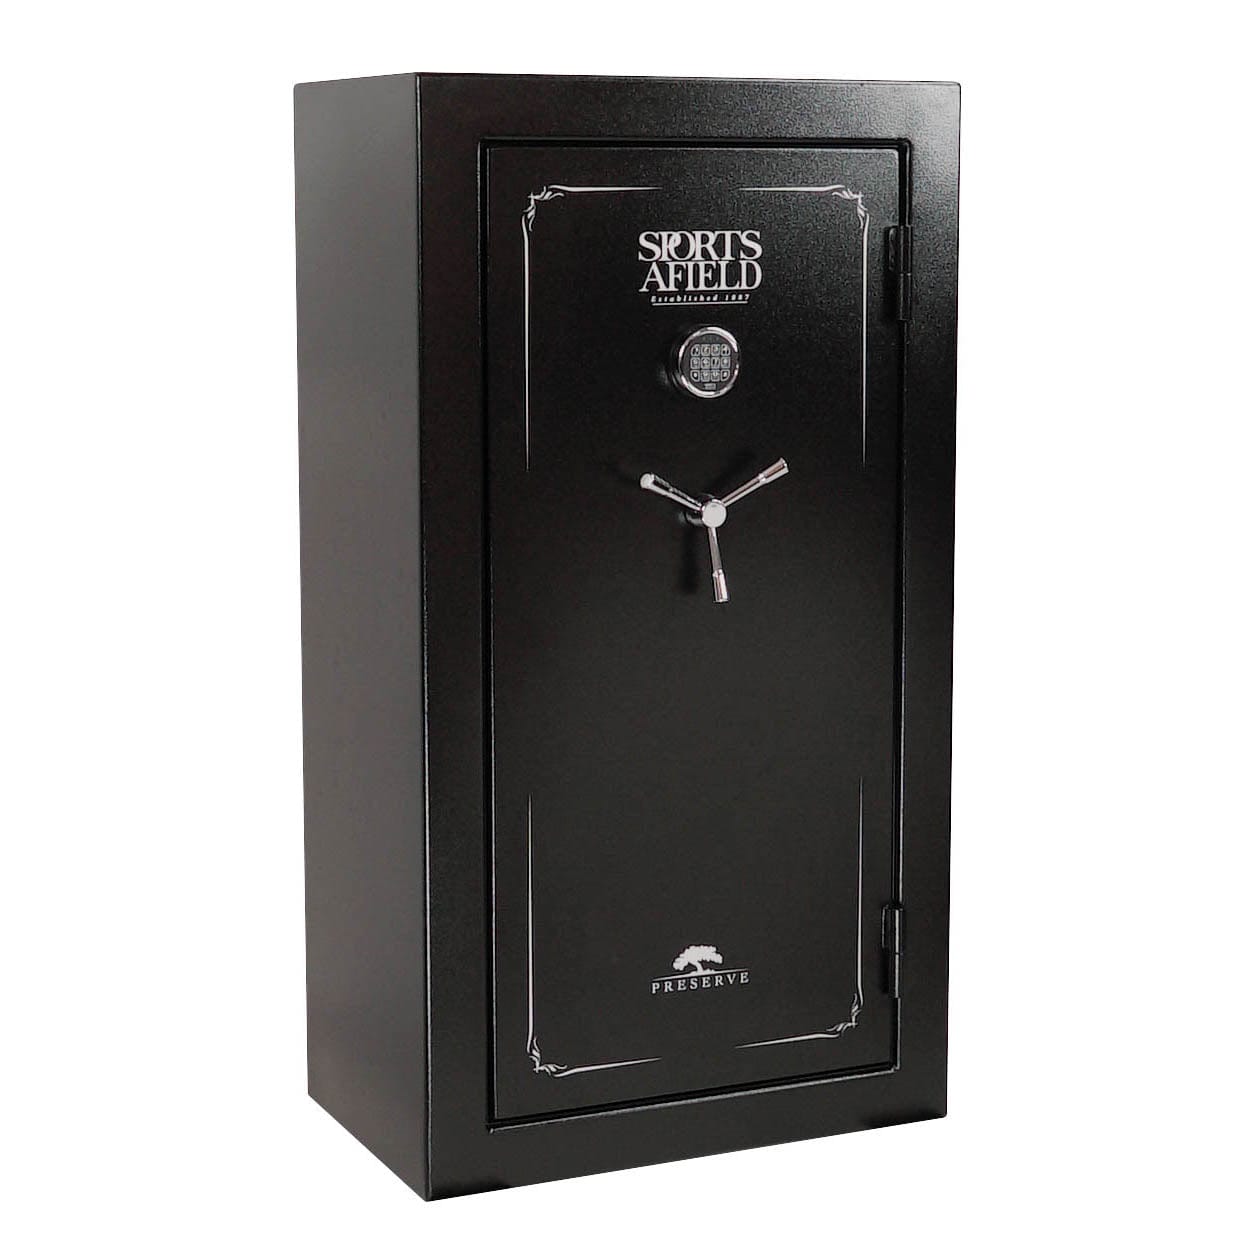 Sports Afield Sports Afield Preserve Fire Rated Safe SA5932P Fire Rated Safe